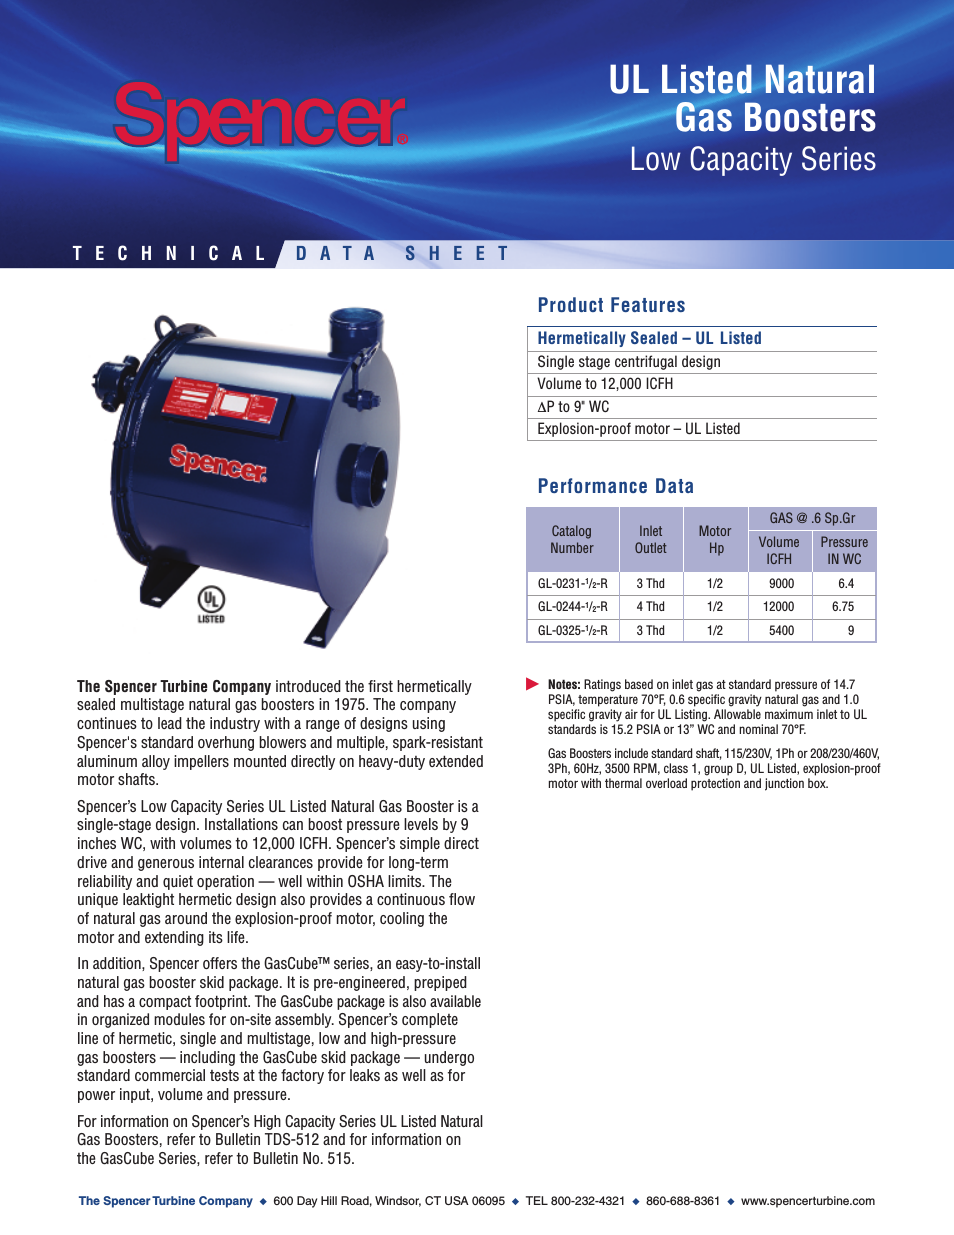 UL Listed Natural Gas Boosters LowCapacity Series